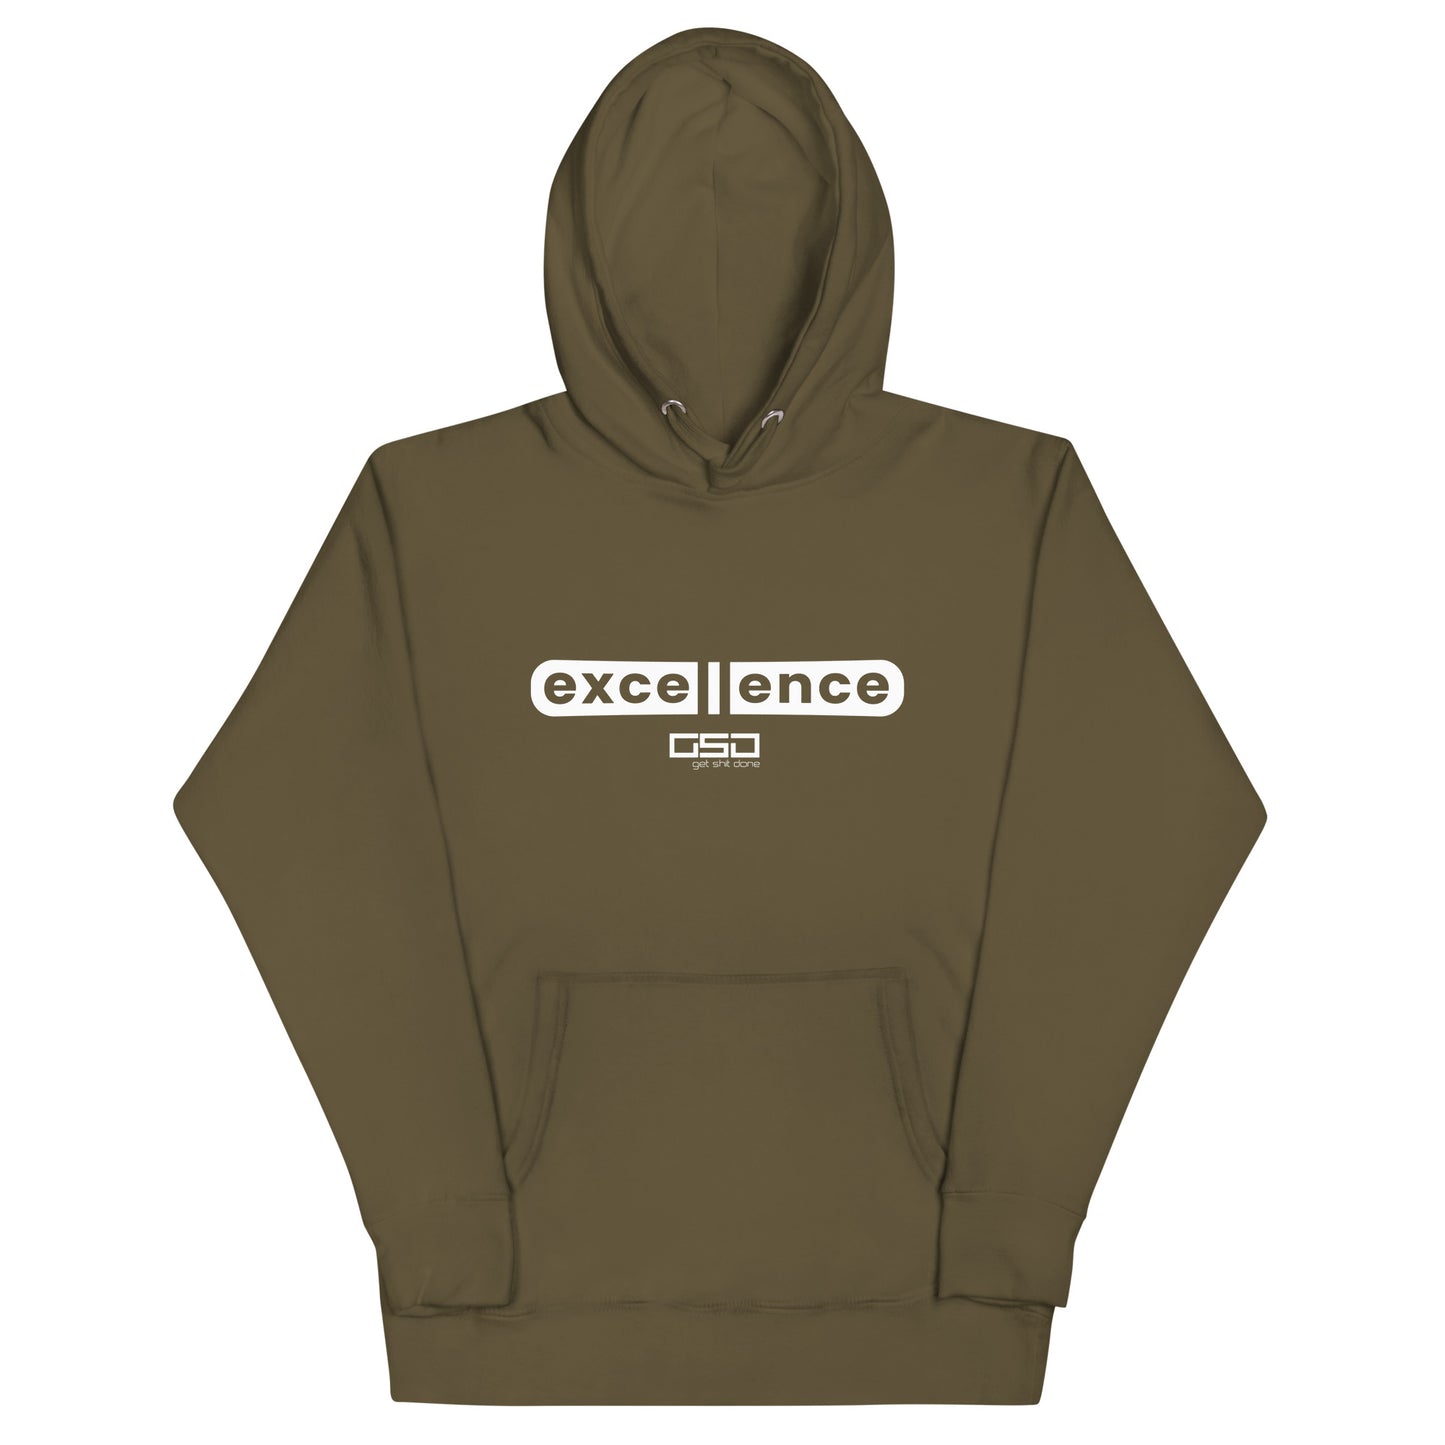 Excellence-Unisex Hoodie